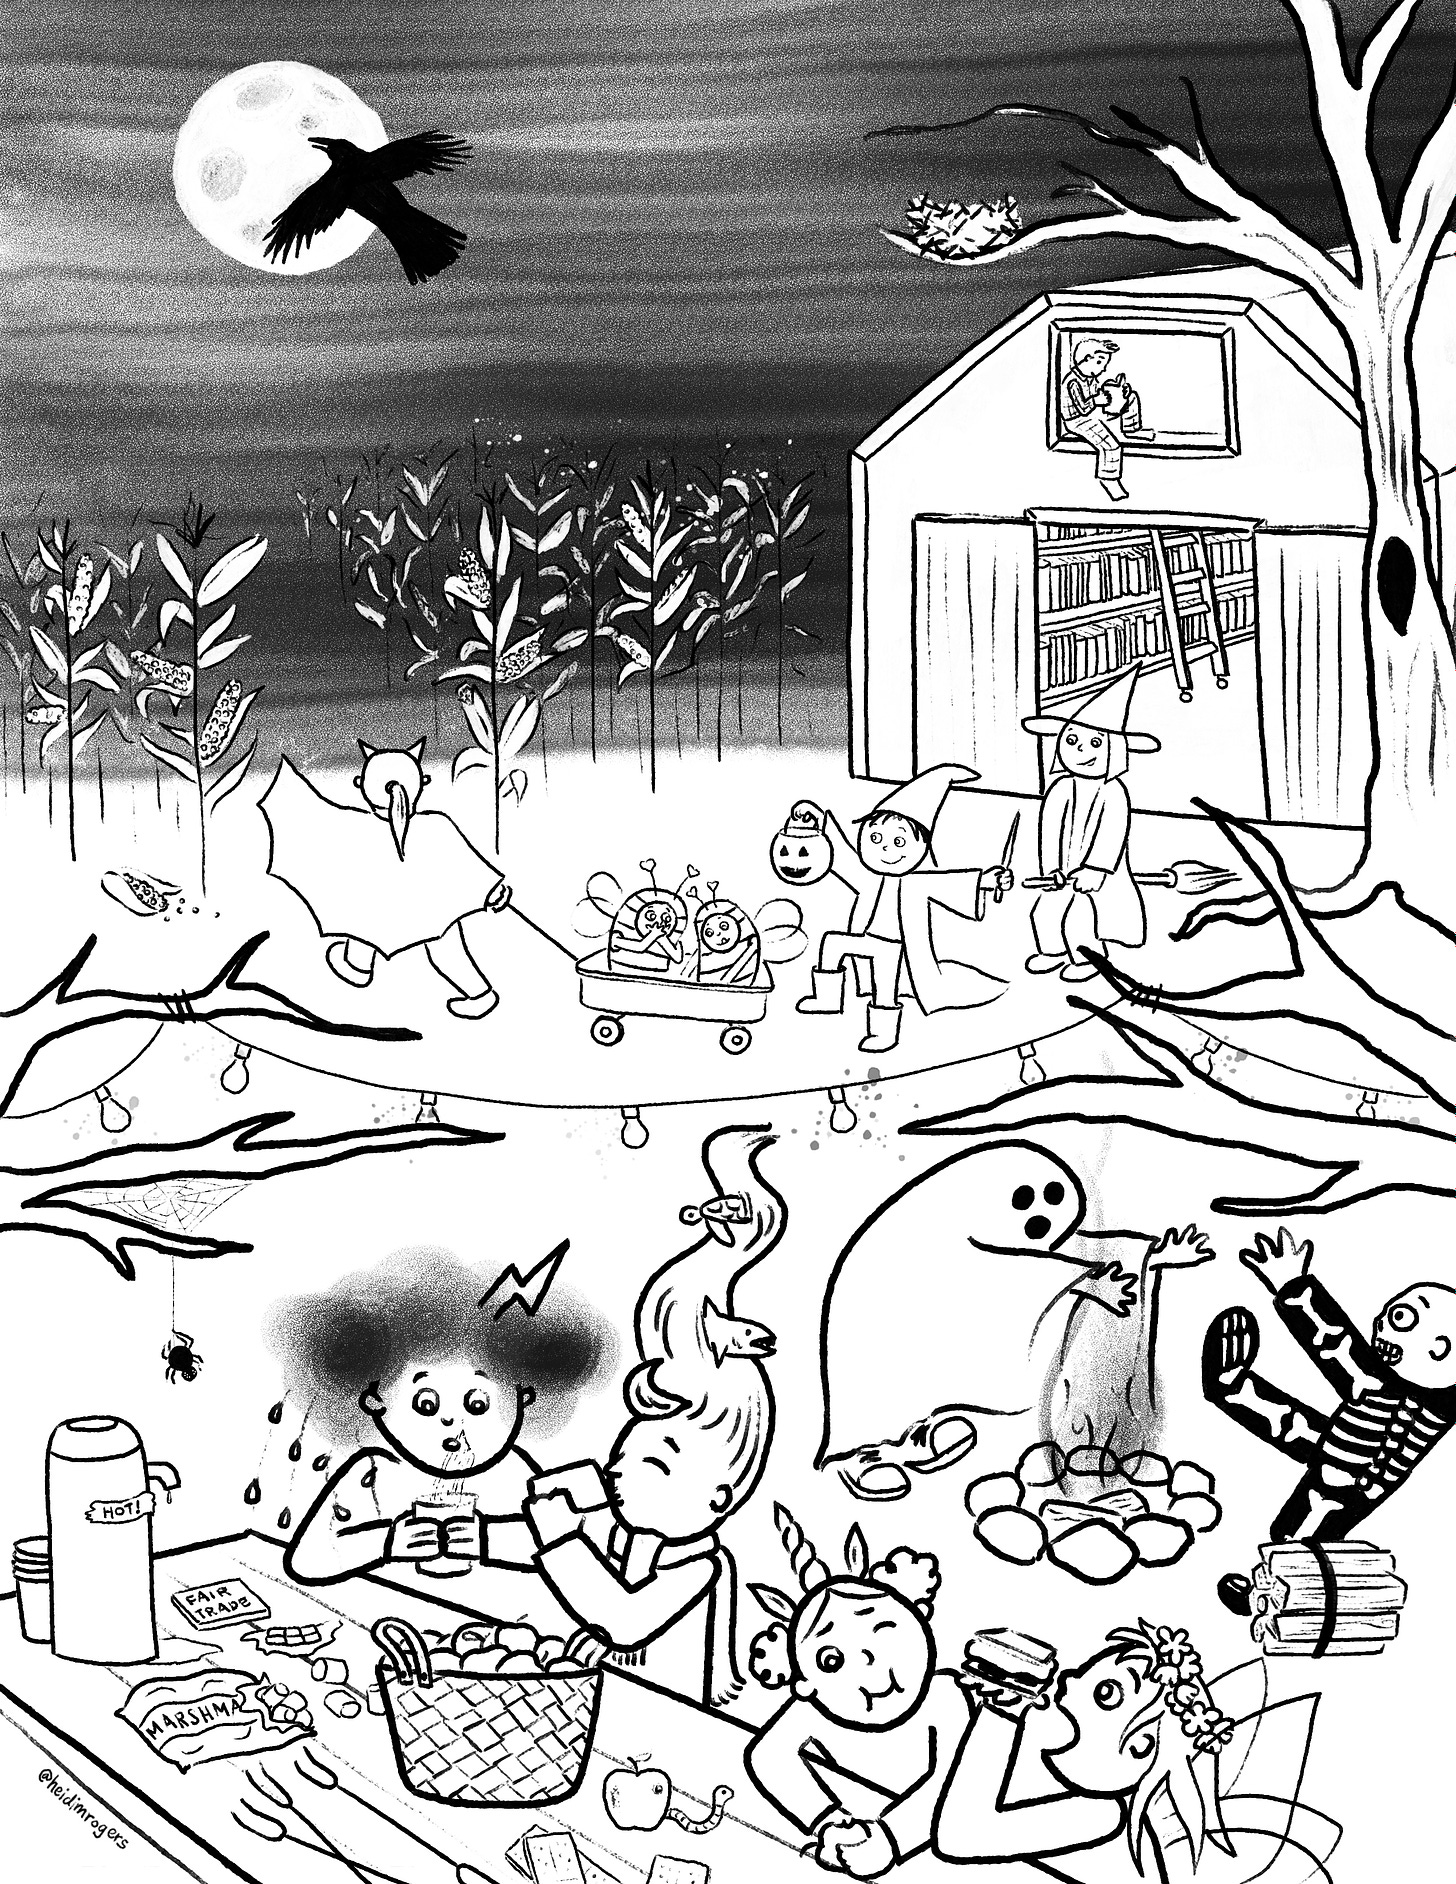 Black and white Halloween-themed coloring page featuring night sky, full moon, crow, corn fields, book barn, costume parade, feast with treats such as s'mores, hot cocoa, apples, and a campfire